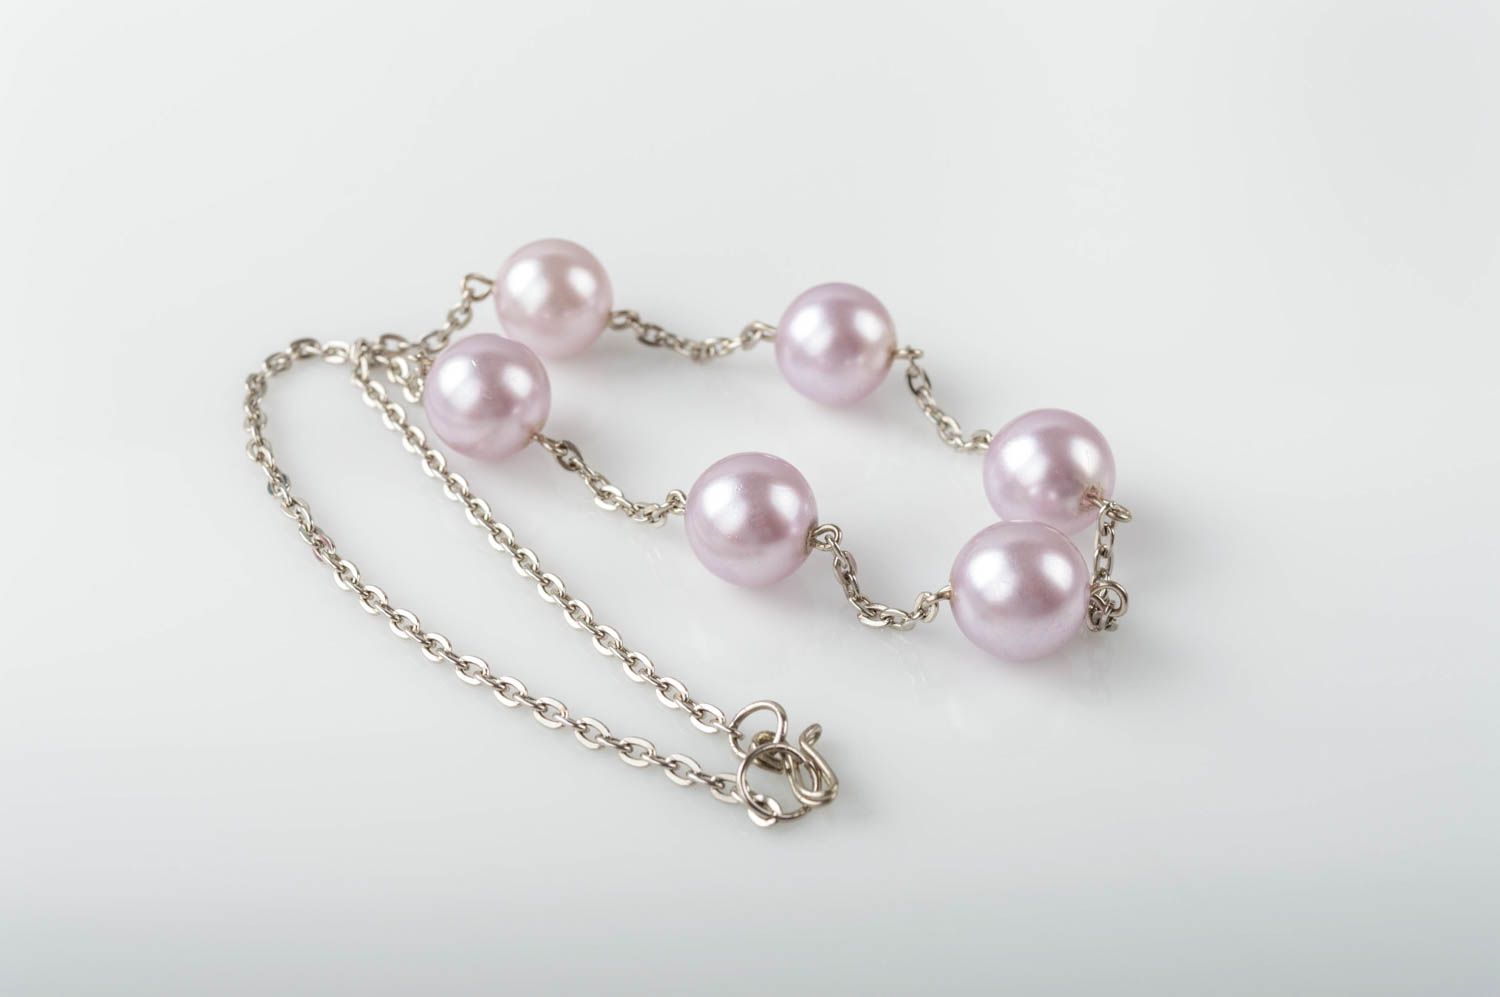 Handmade necklace accessory with artificial pearls stylish unusual jewelry photo 3